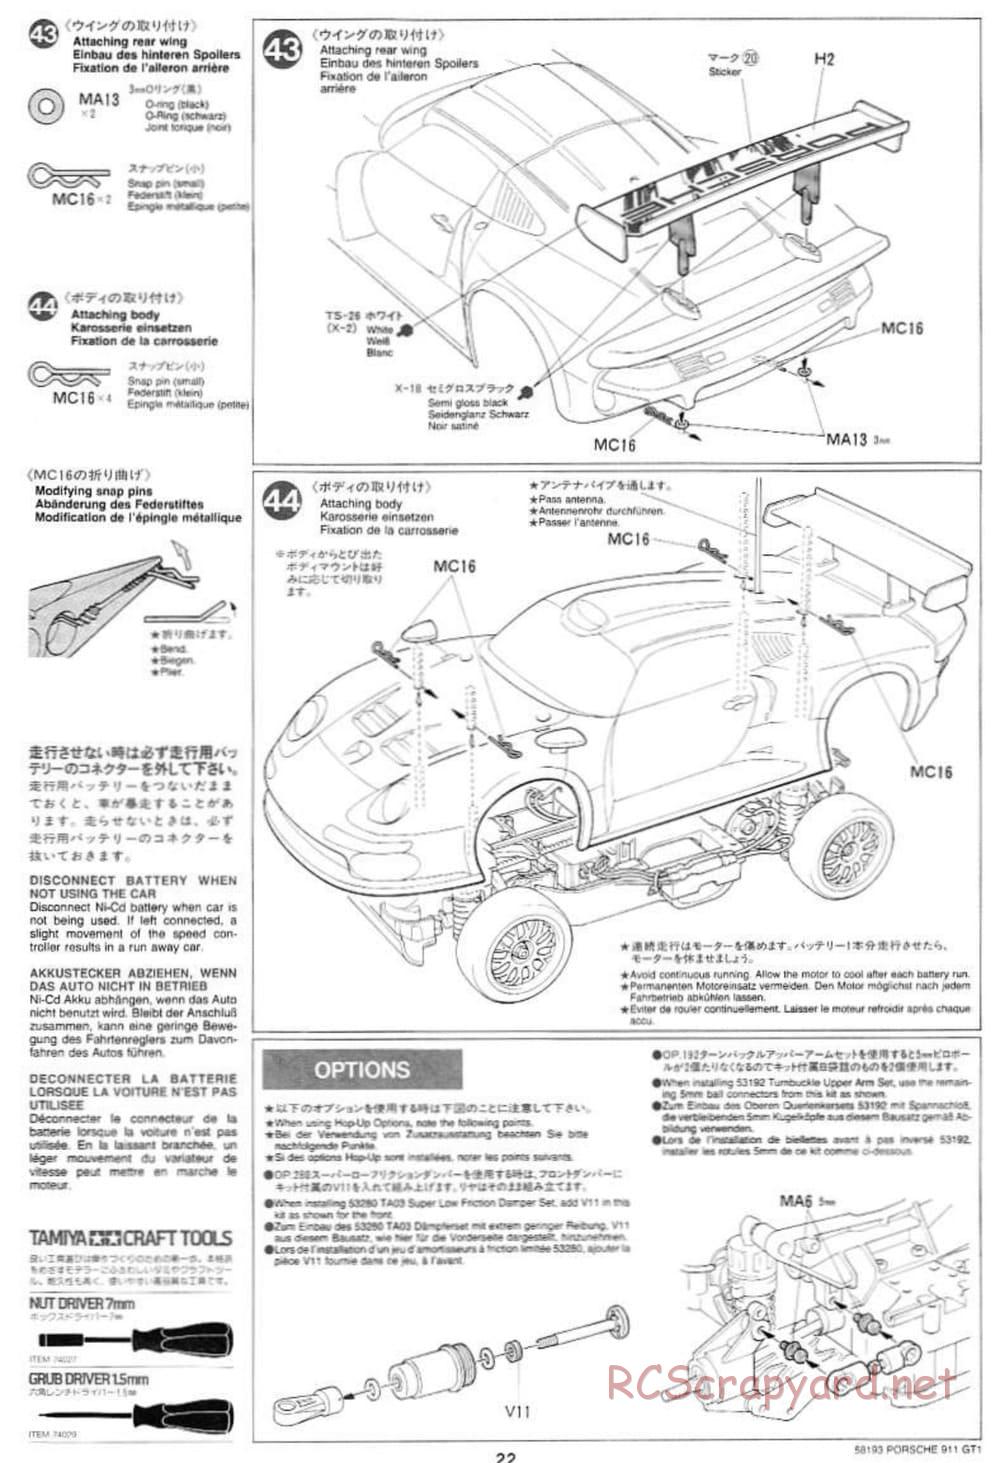 Tamiya - Porsche 911 GT1 - TA-03RS Chassis - Manual - Page 22